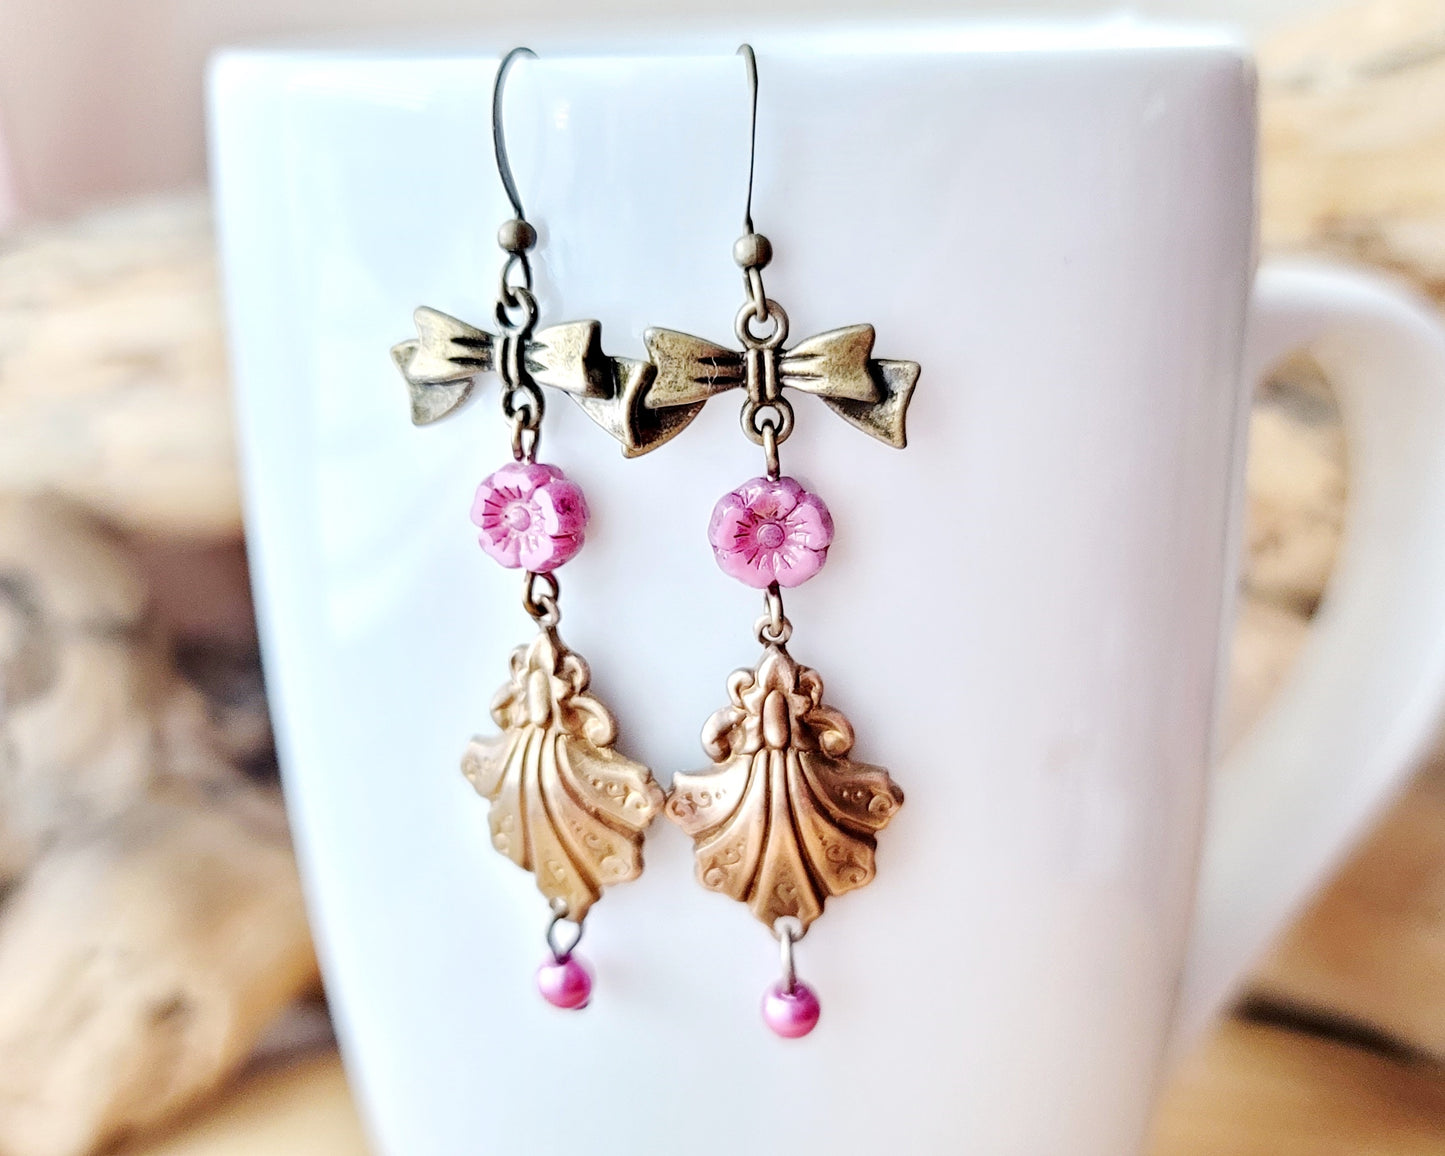 Vintage Romance Flower Shell Bow Earrings made with Upcycled Vintage Shells, Pink Flowers and Bows. Displayed on white mug